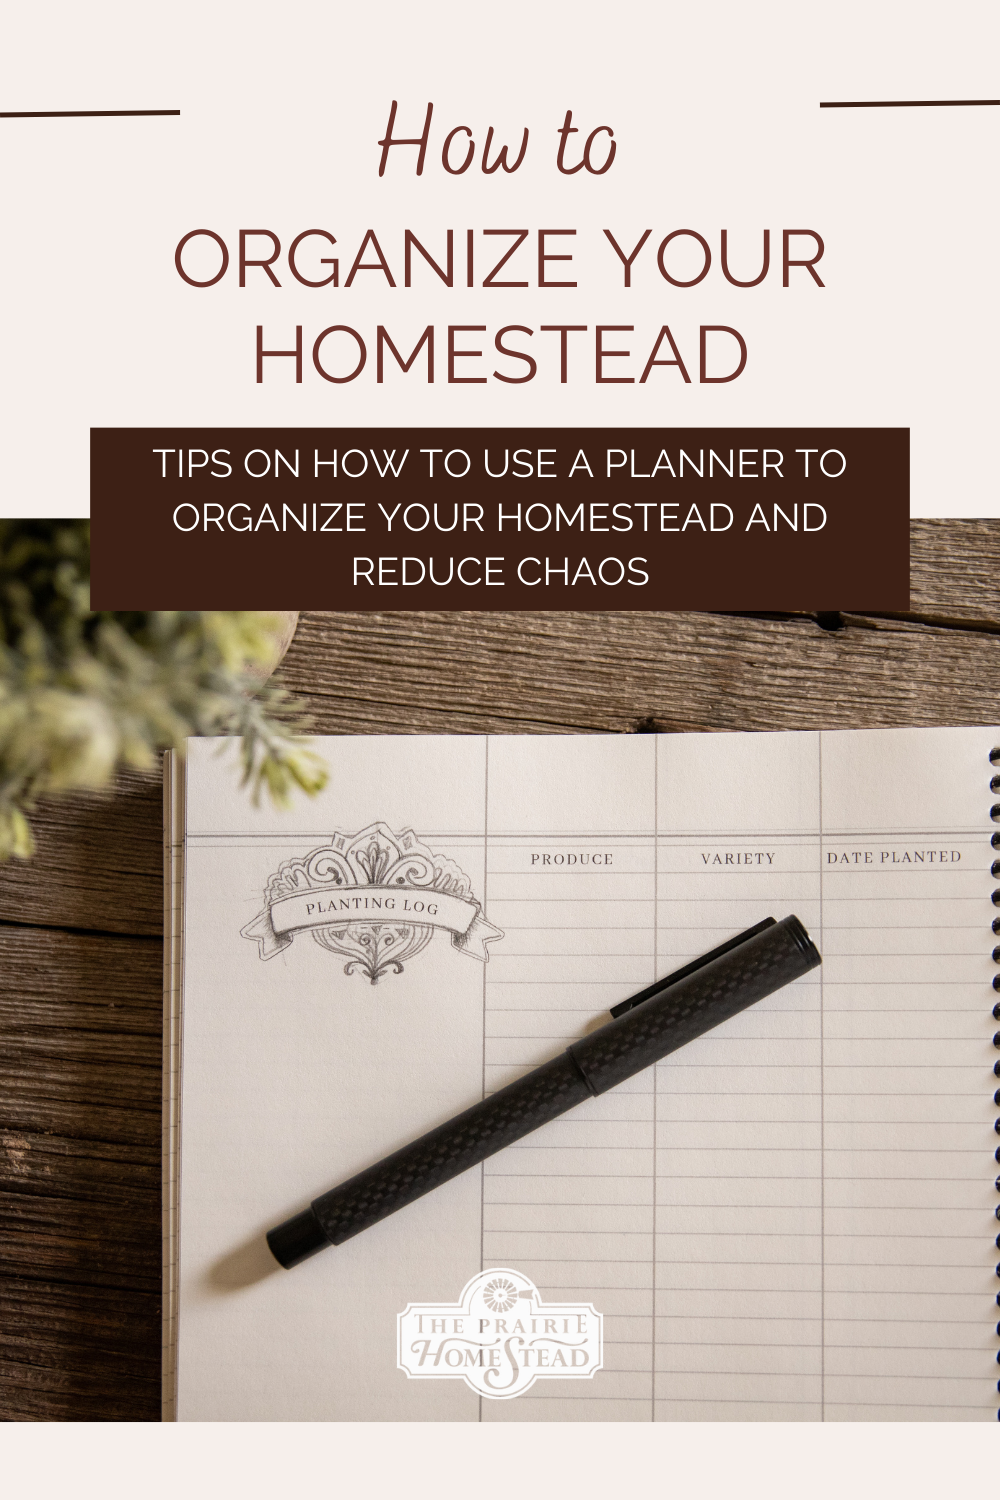 How to Organize Your Homestead